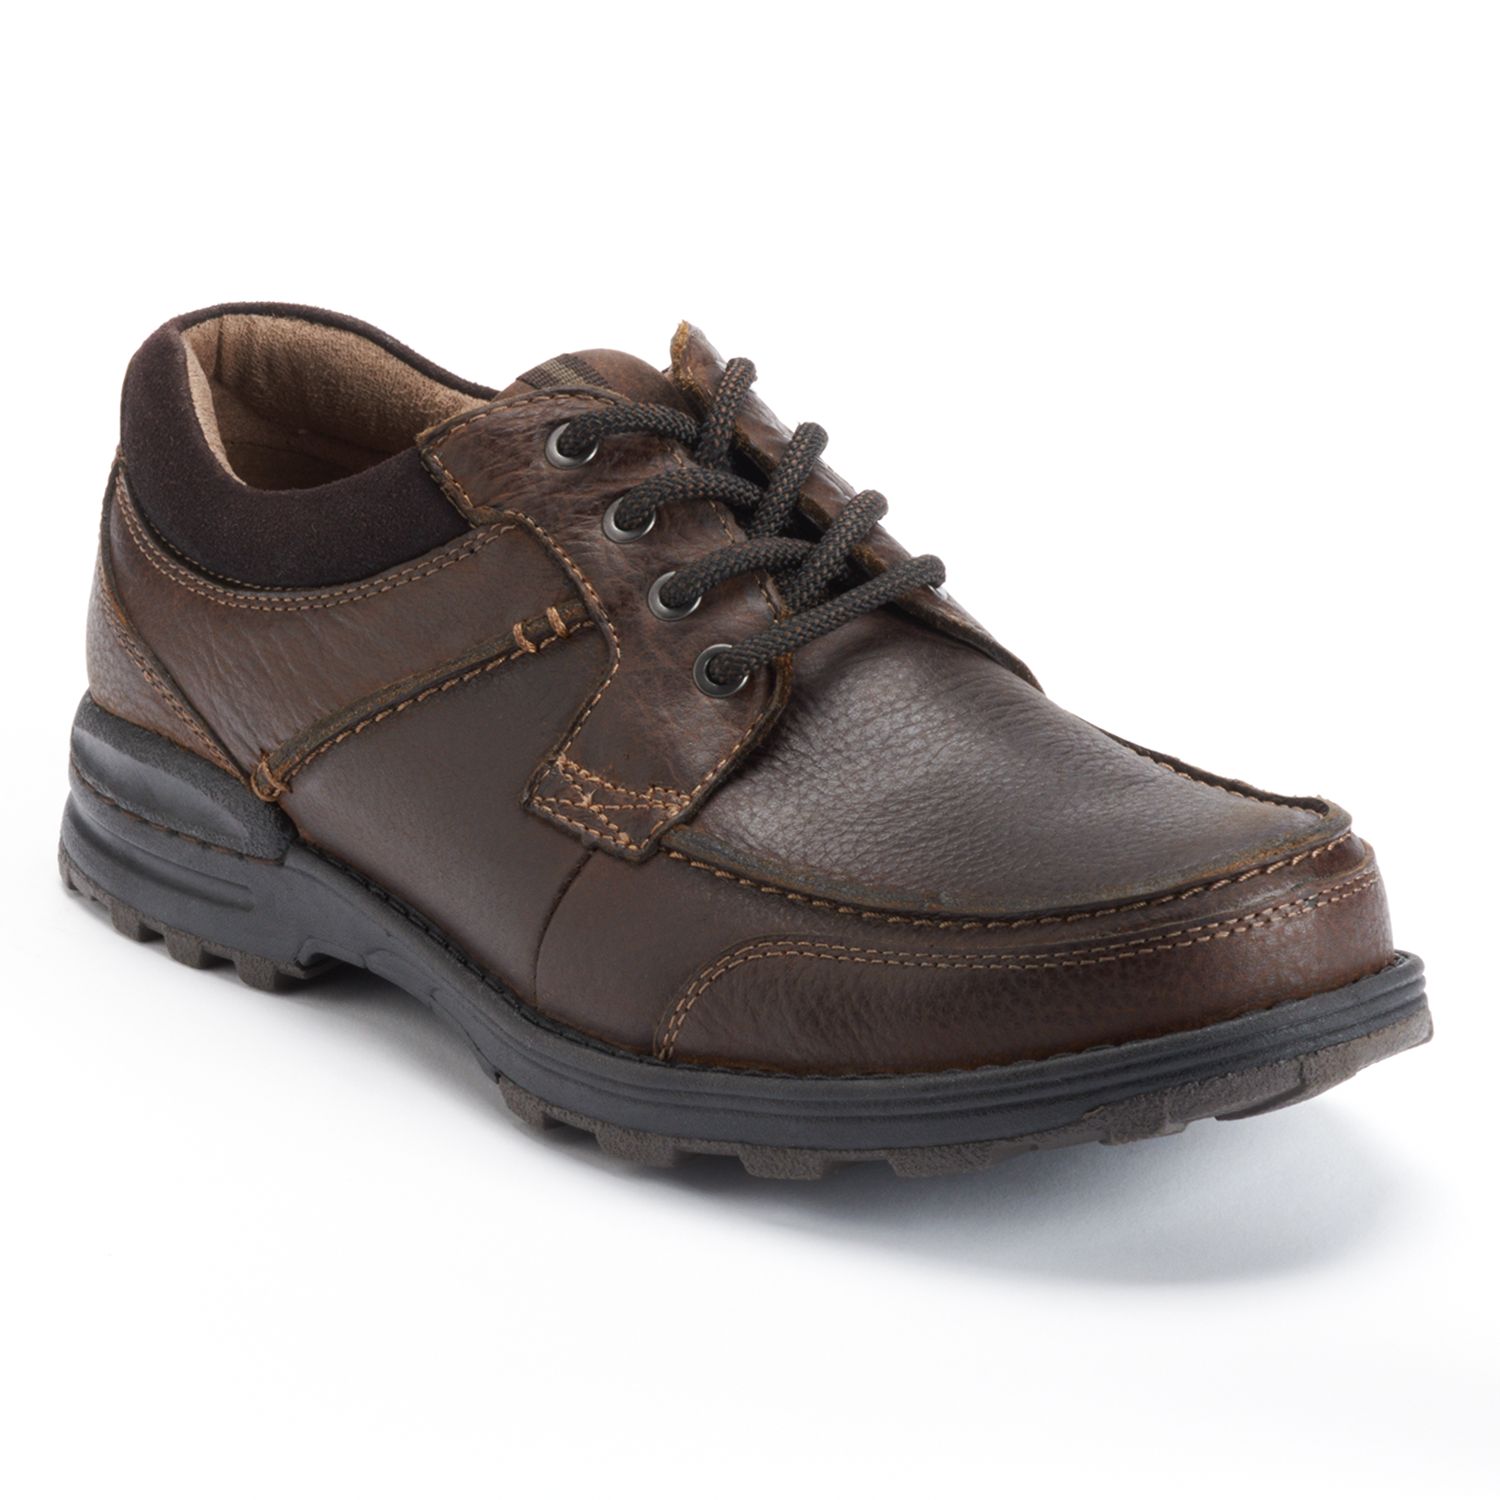 mens casual oxford shoes brown